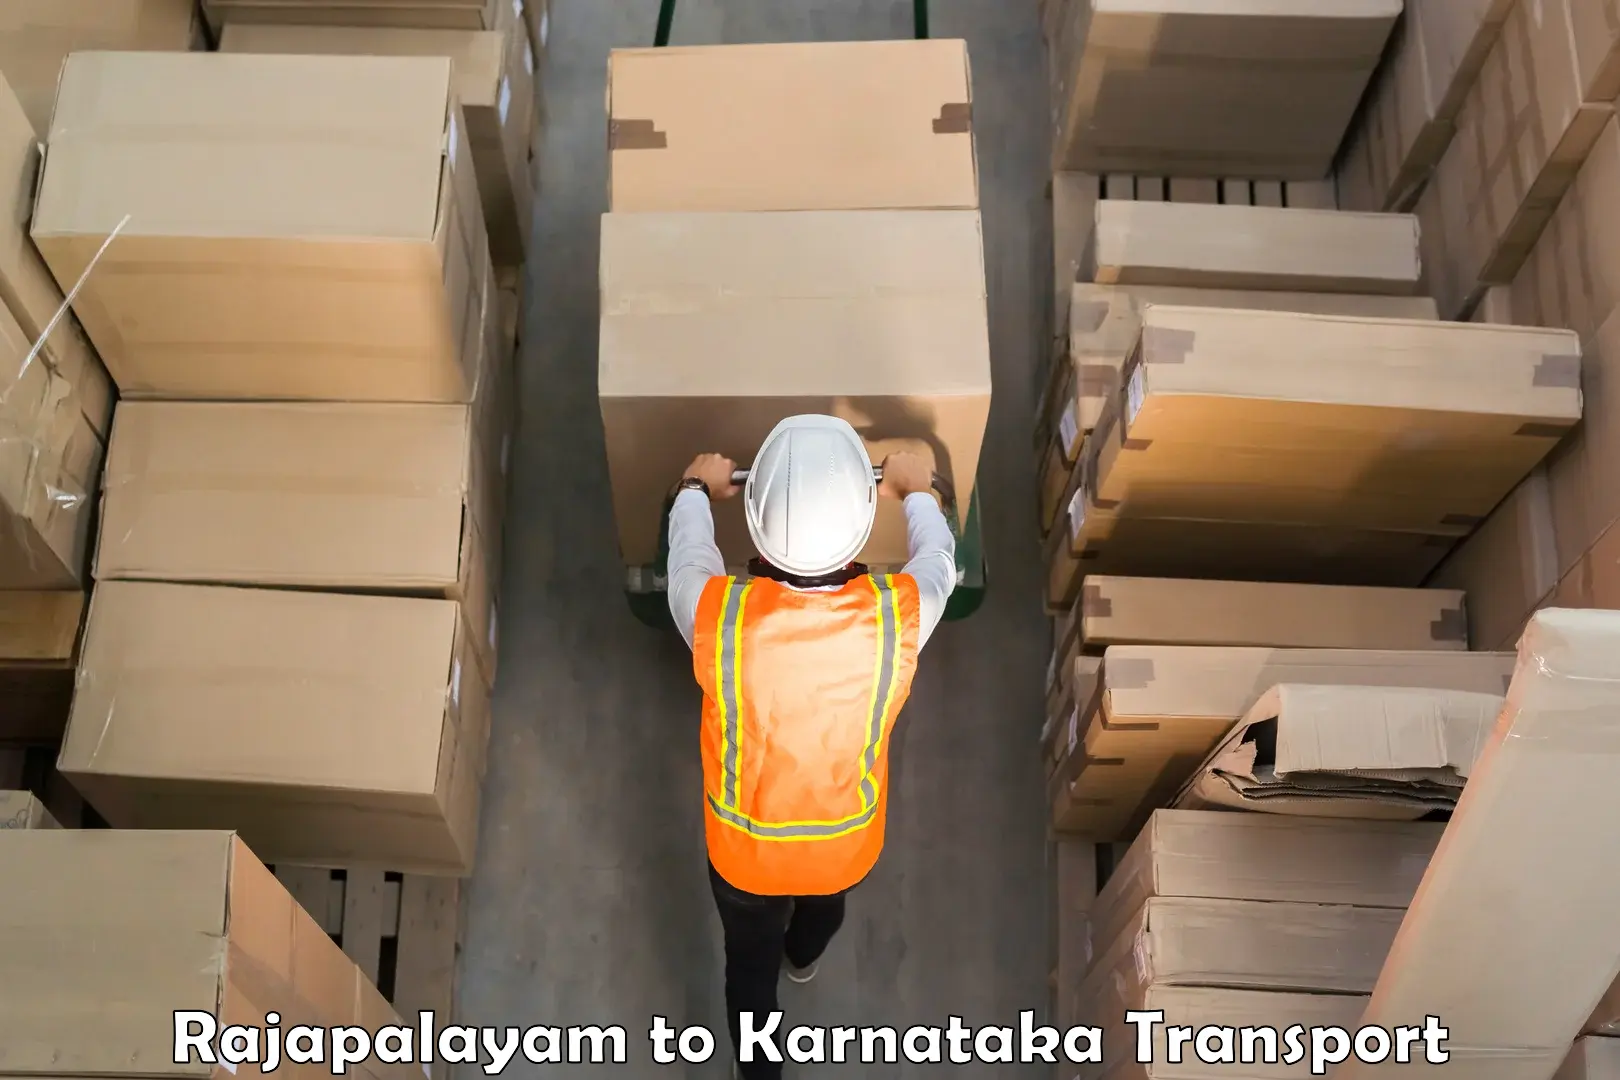 Truck transport companies in India Rajapalayam to Kittur